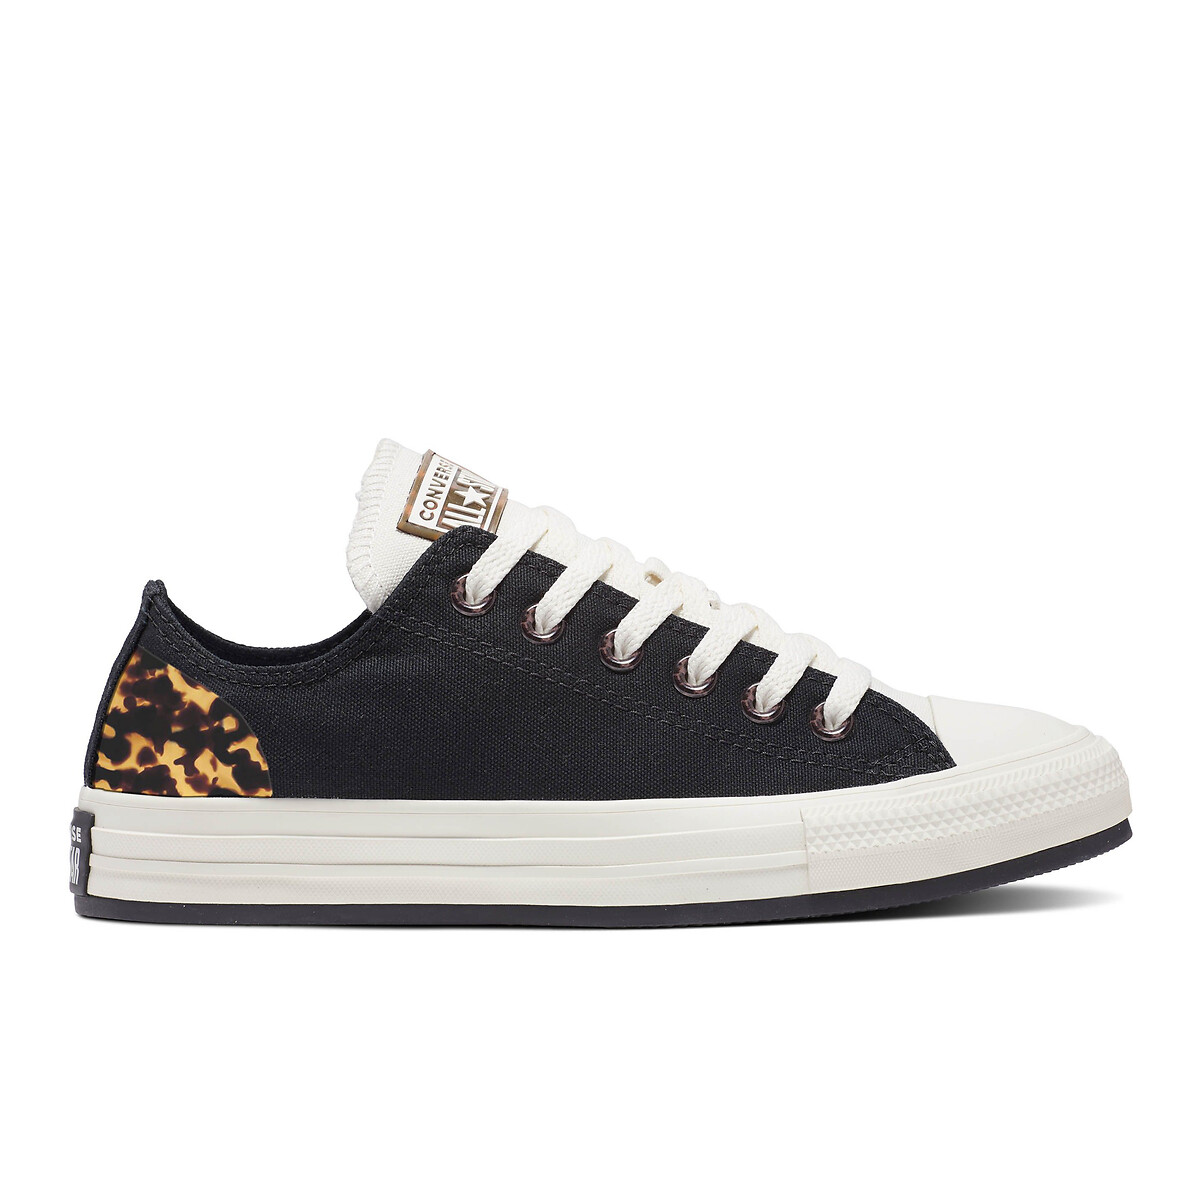 Sneakers Chuck Taylor All Star Ox Tortoise von Converse